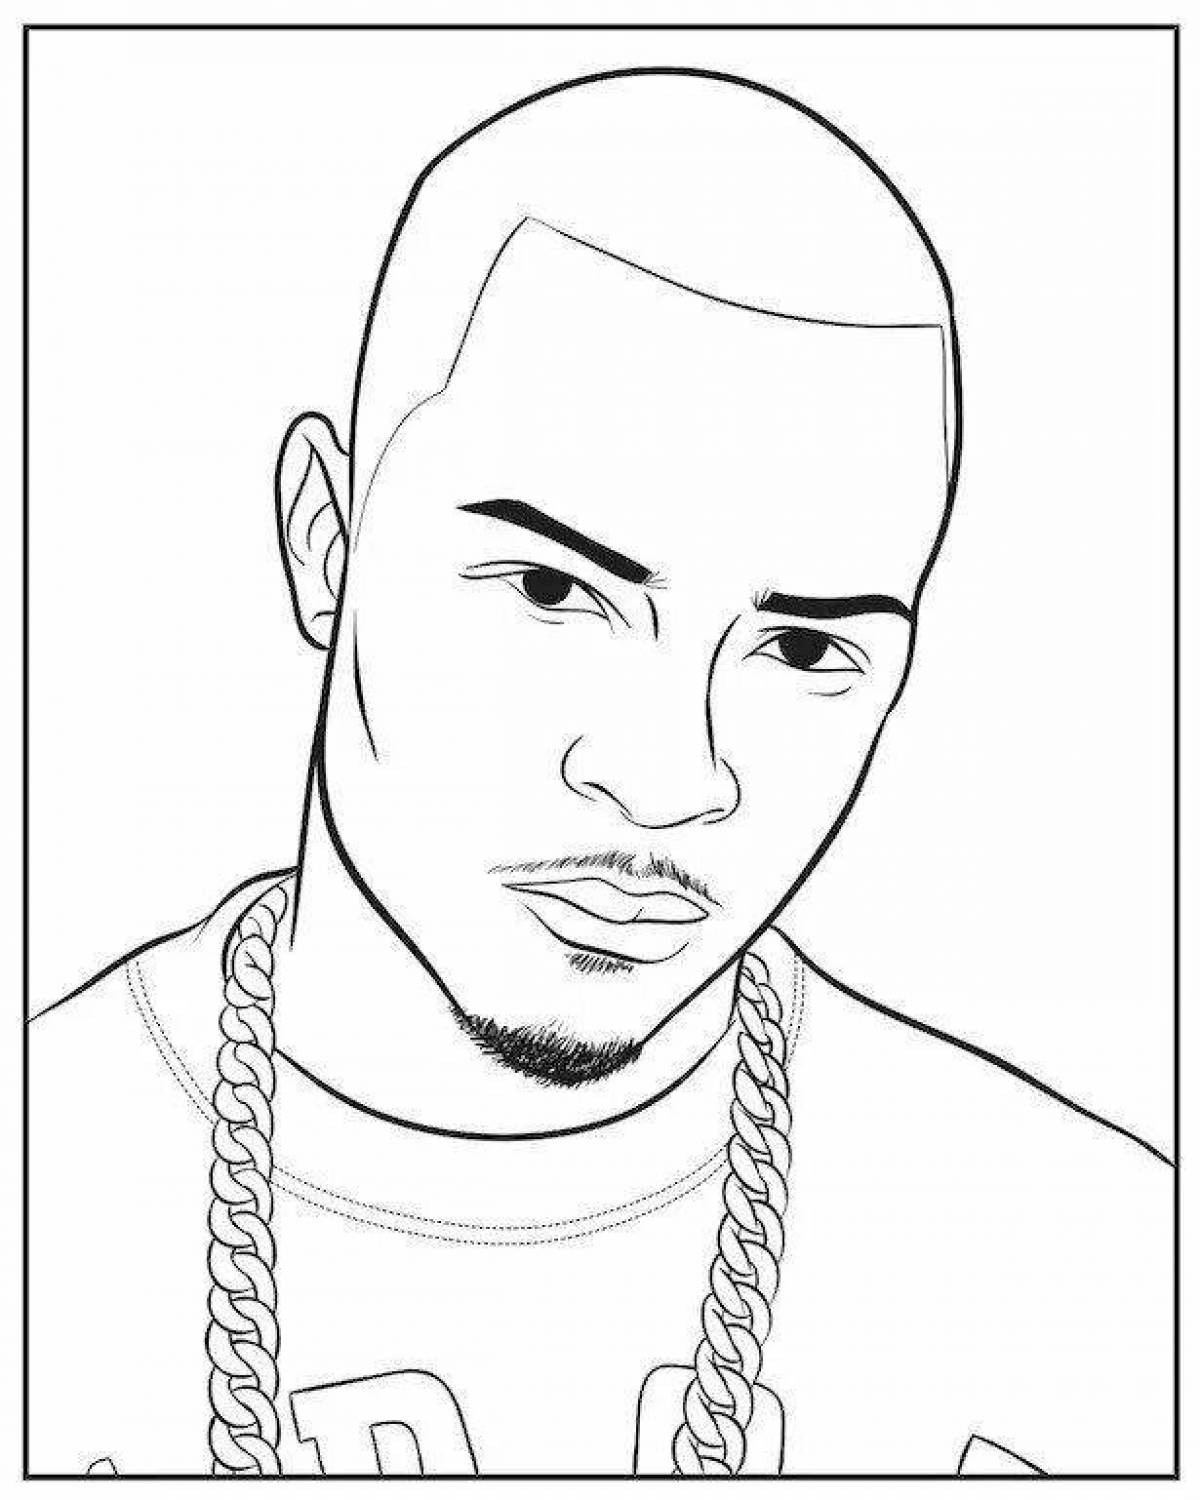 Radiant coloring page of black person